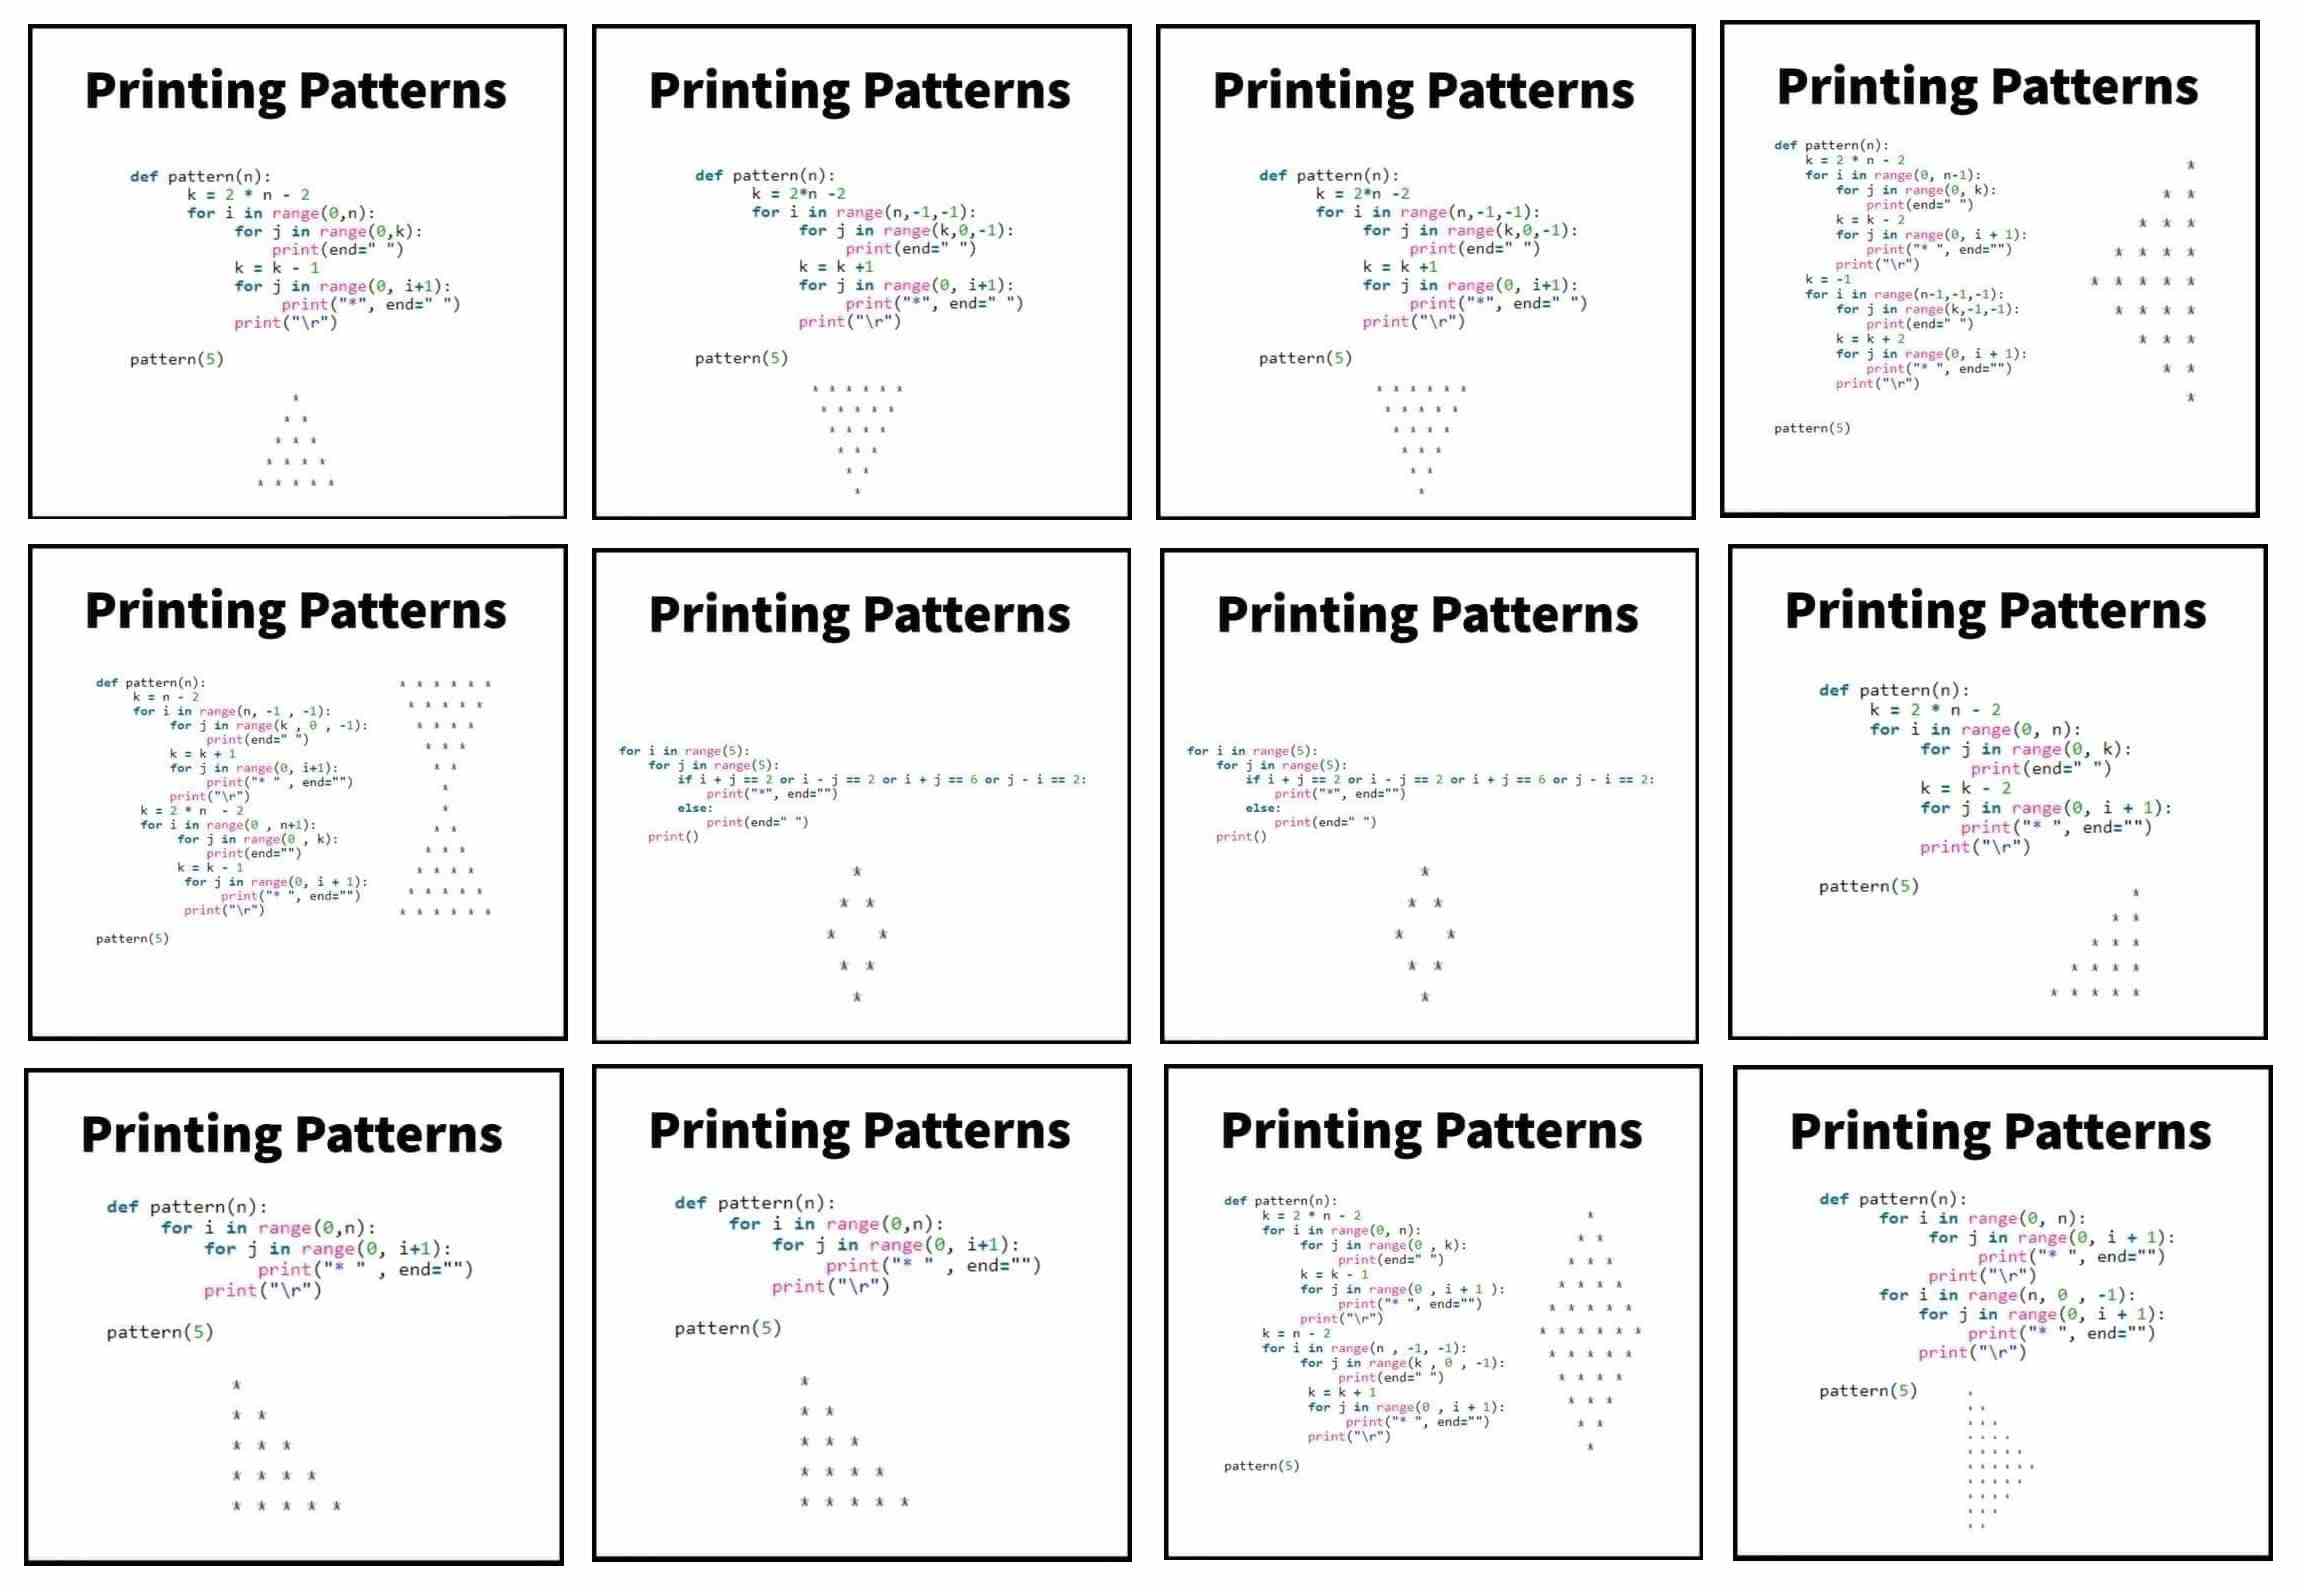 Top 12 Printing Patterns with Code